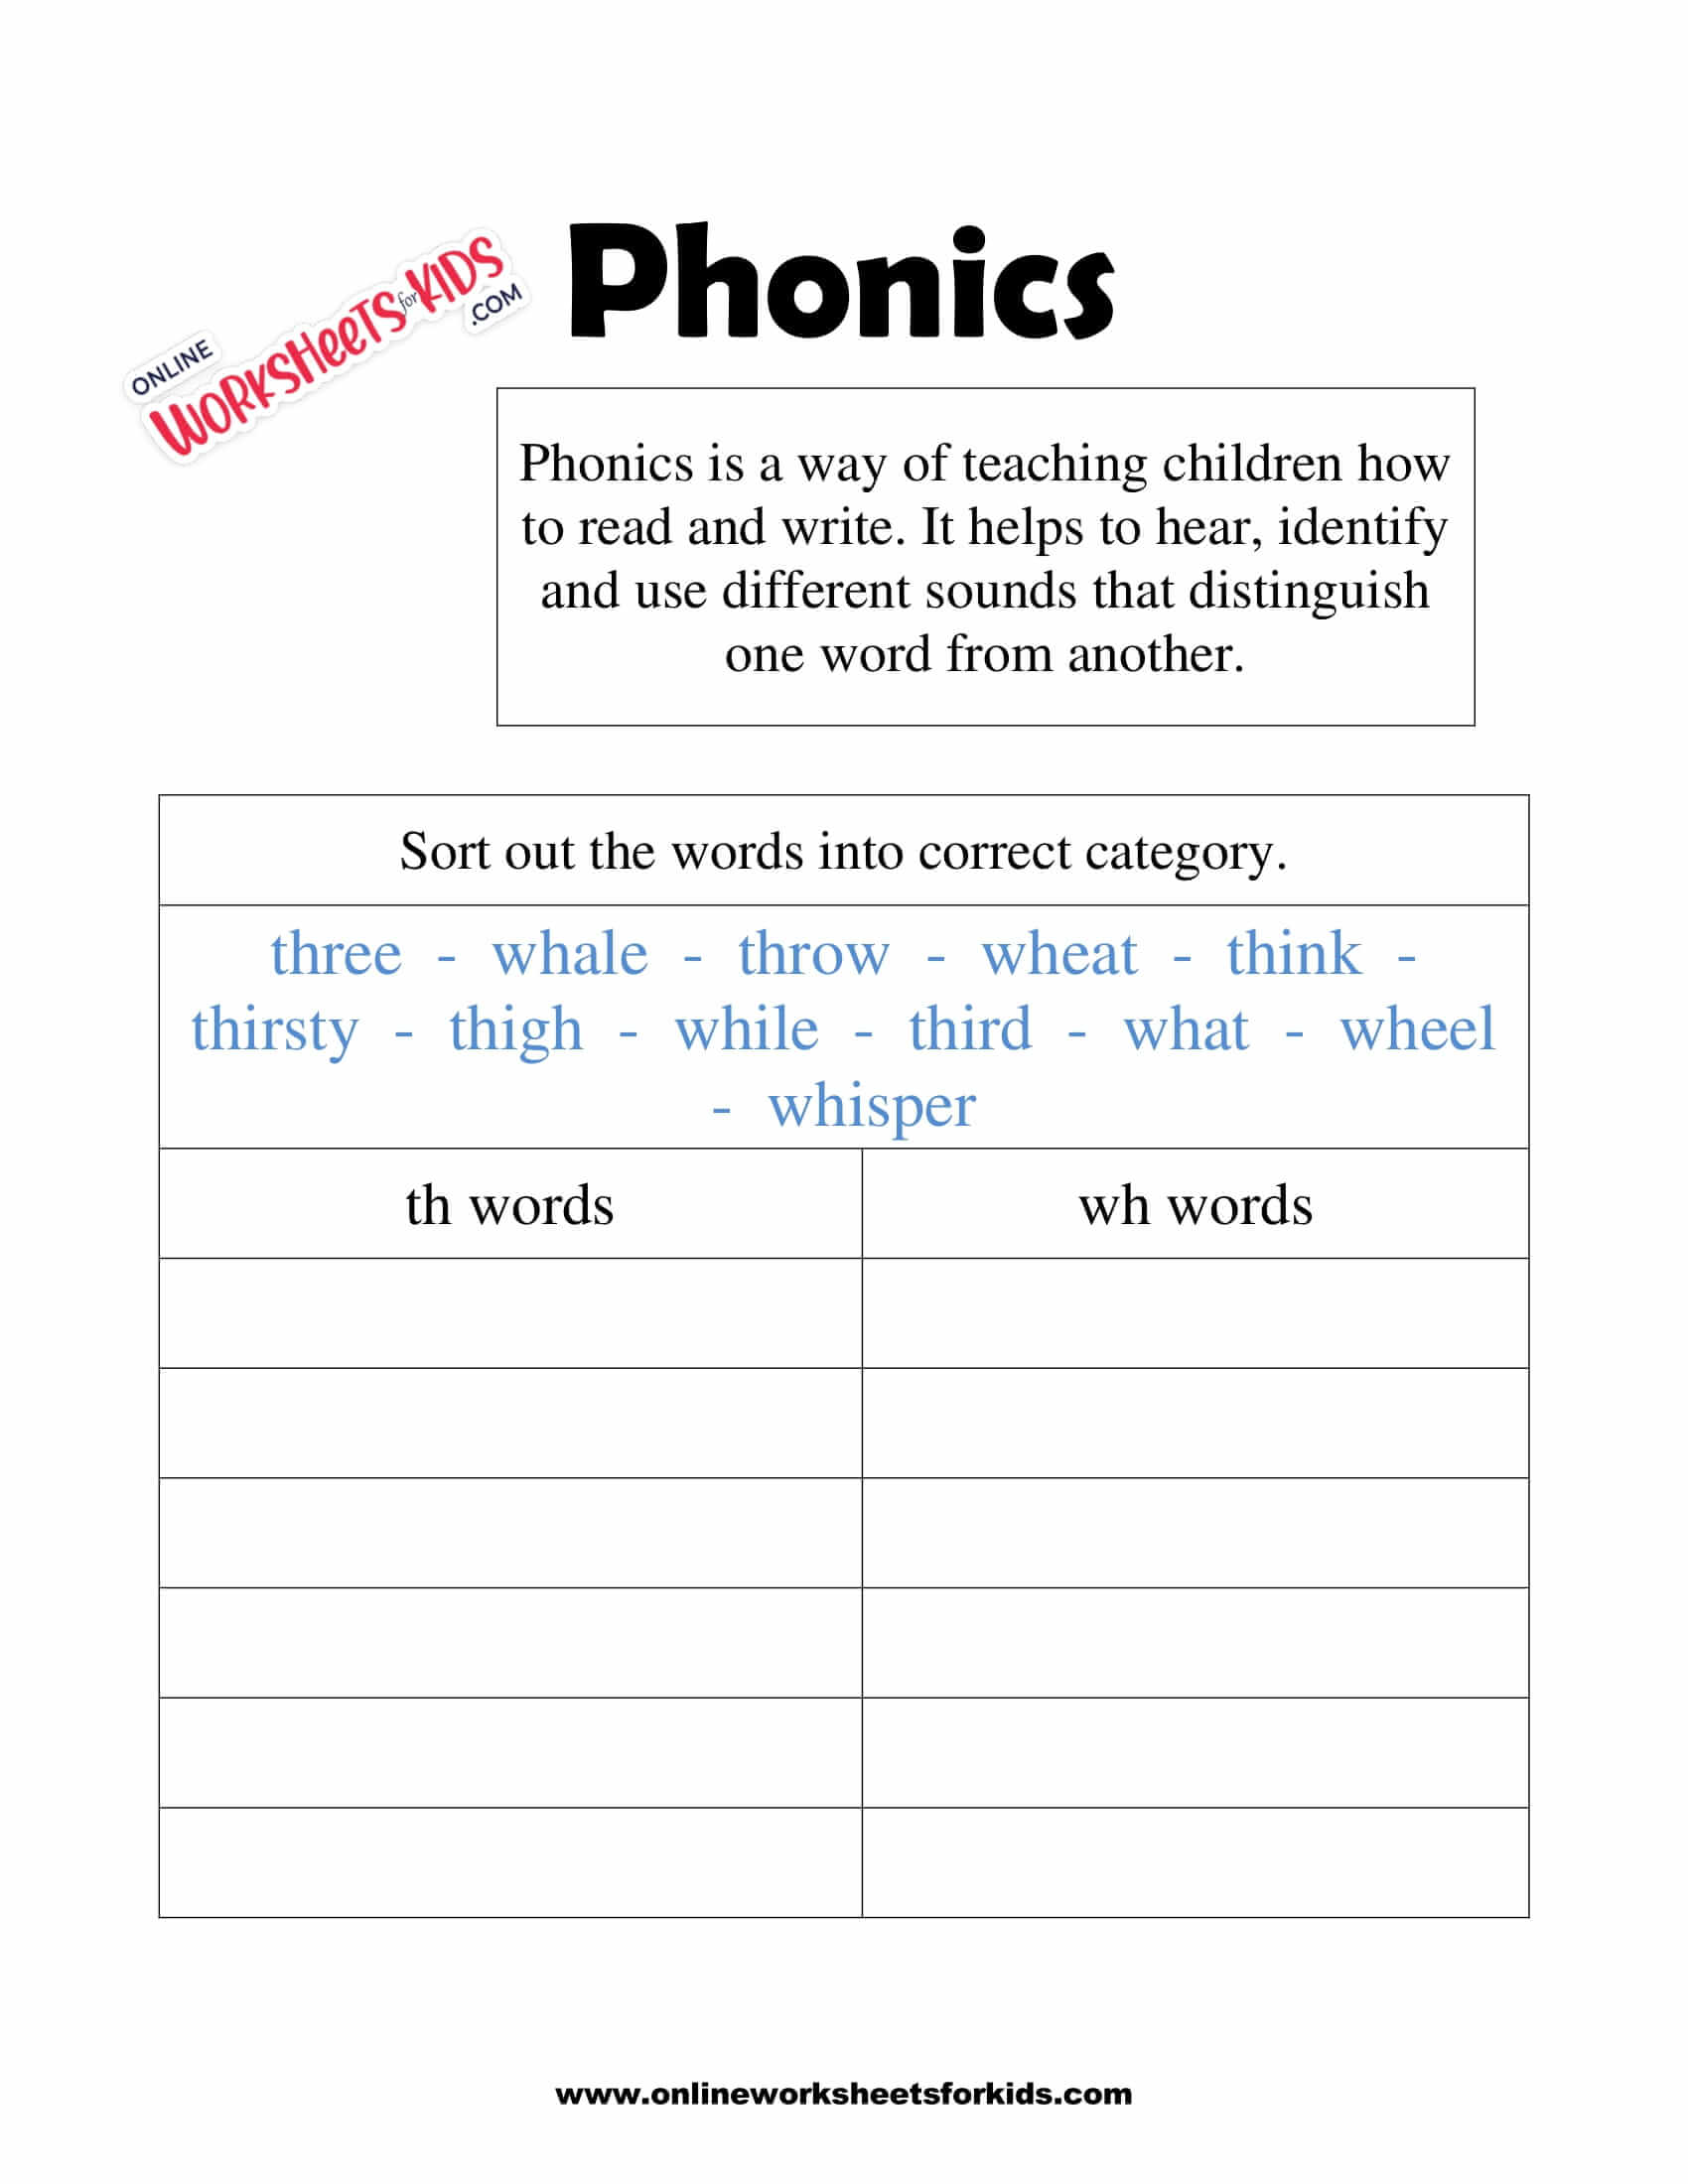 free-phonics-worksheets-and-printable-for-kids